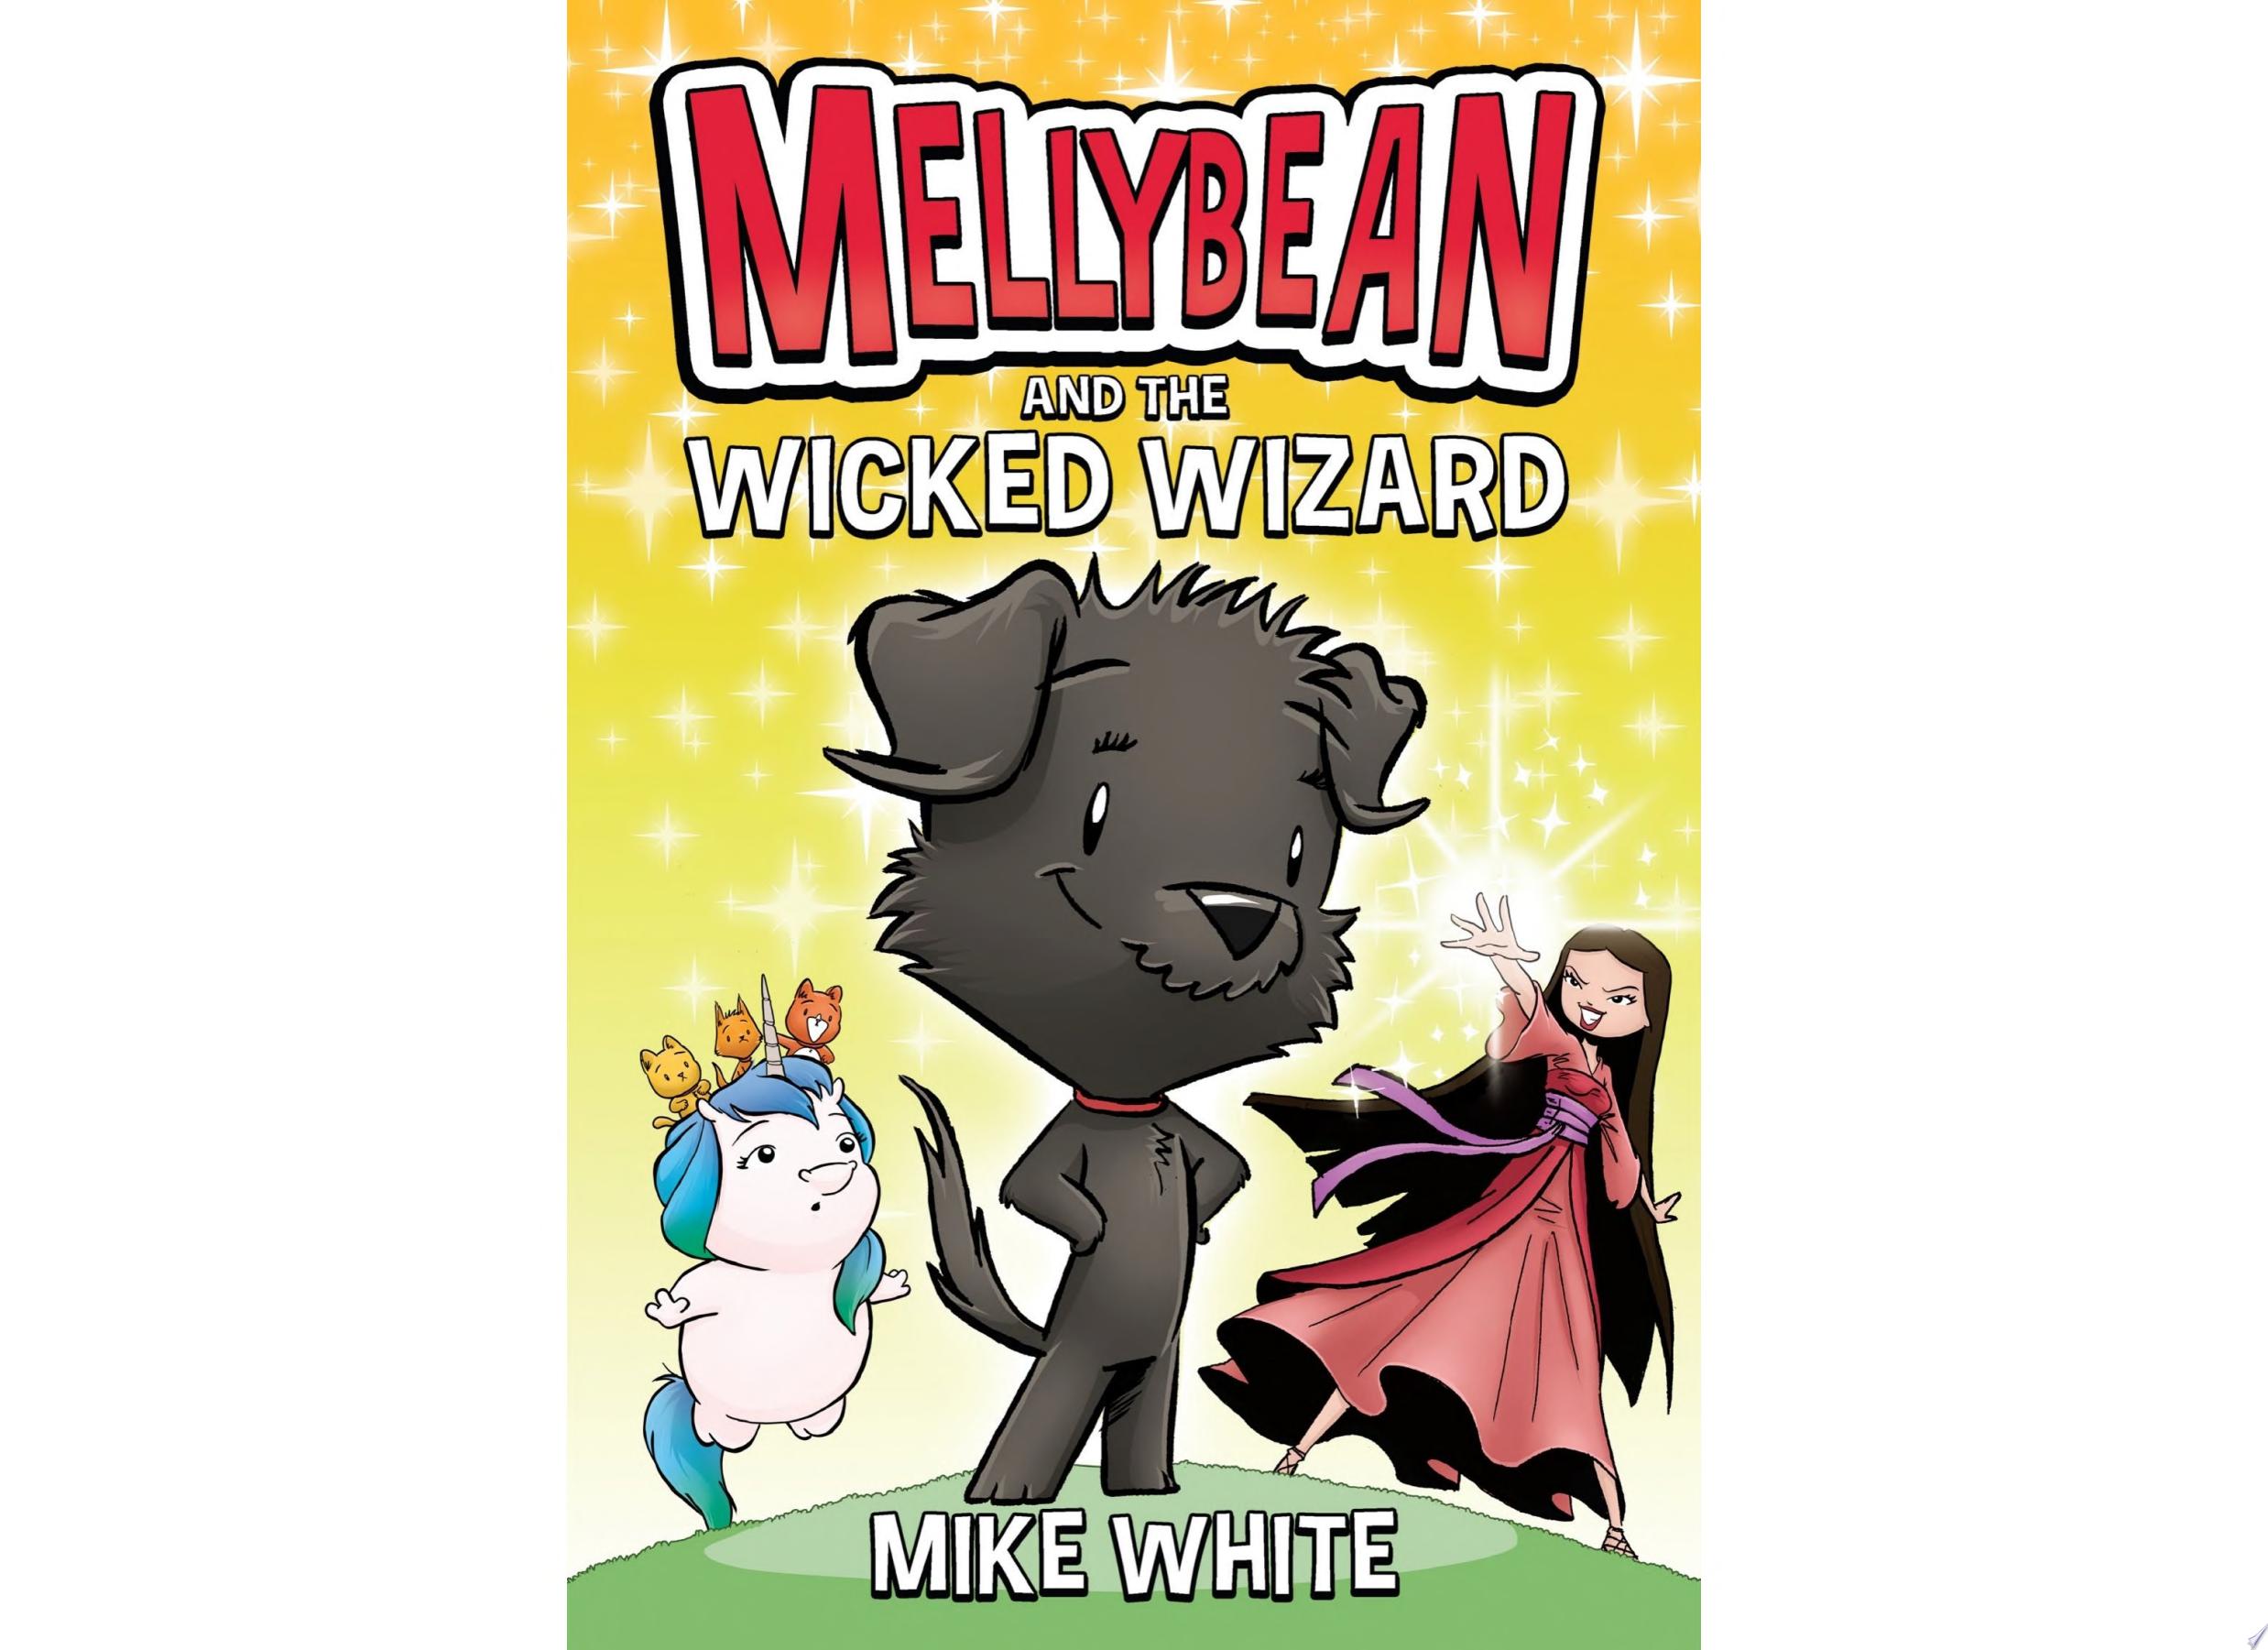 Image for "Mellybean and the Wicked Wizard"